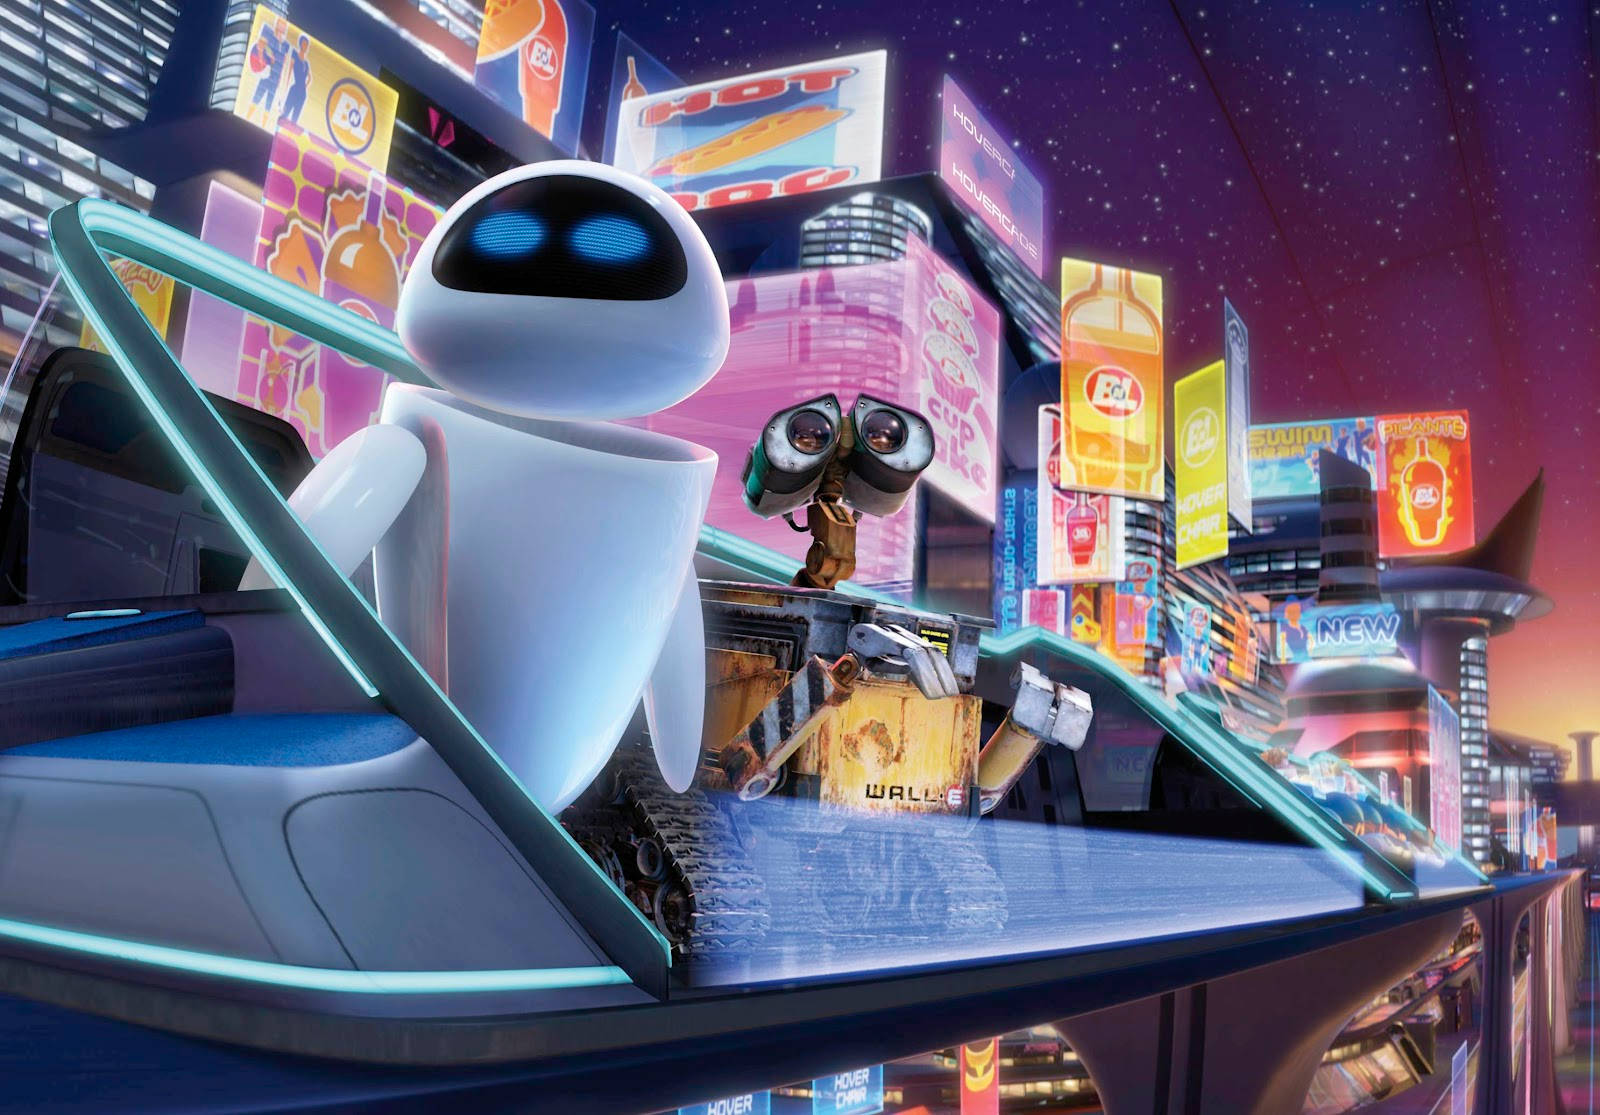 Wall E And Eve Wallpapers